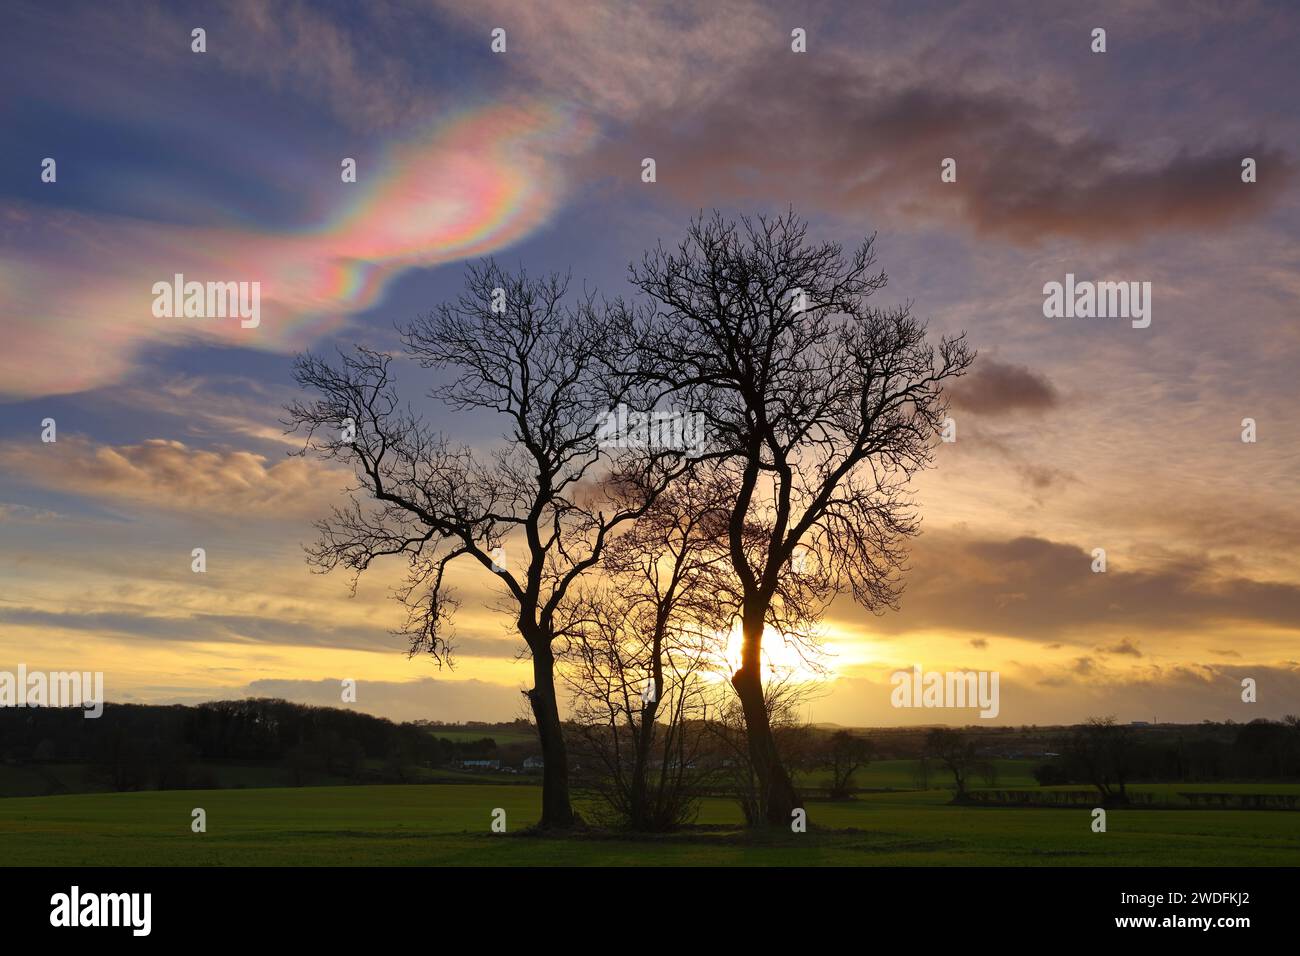 Landscape image with rare Nacreous clouds at sunset near Ferryhill, County Durham England, UK. Stock Photo